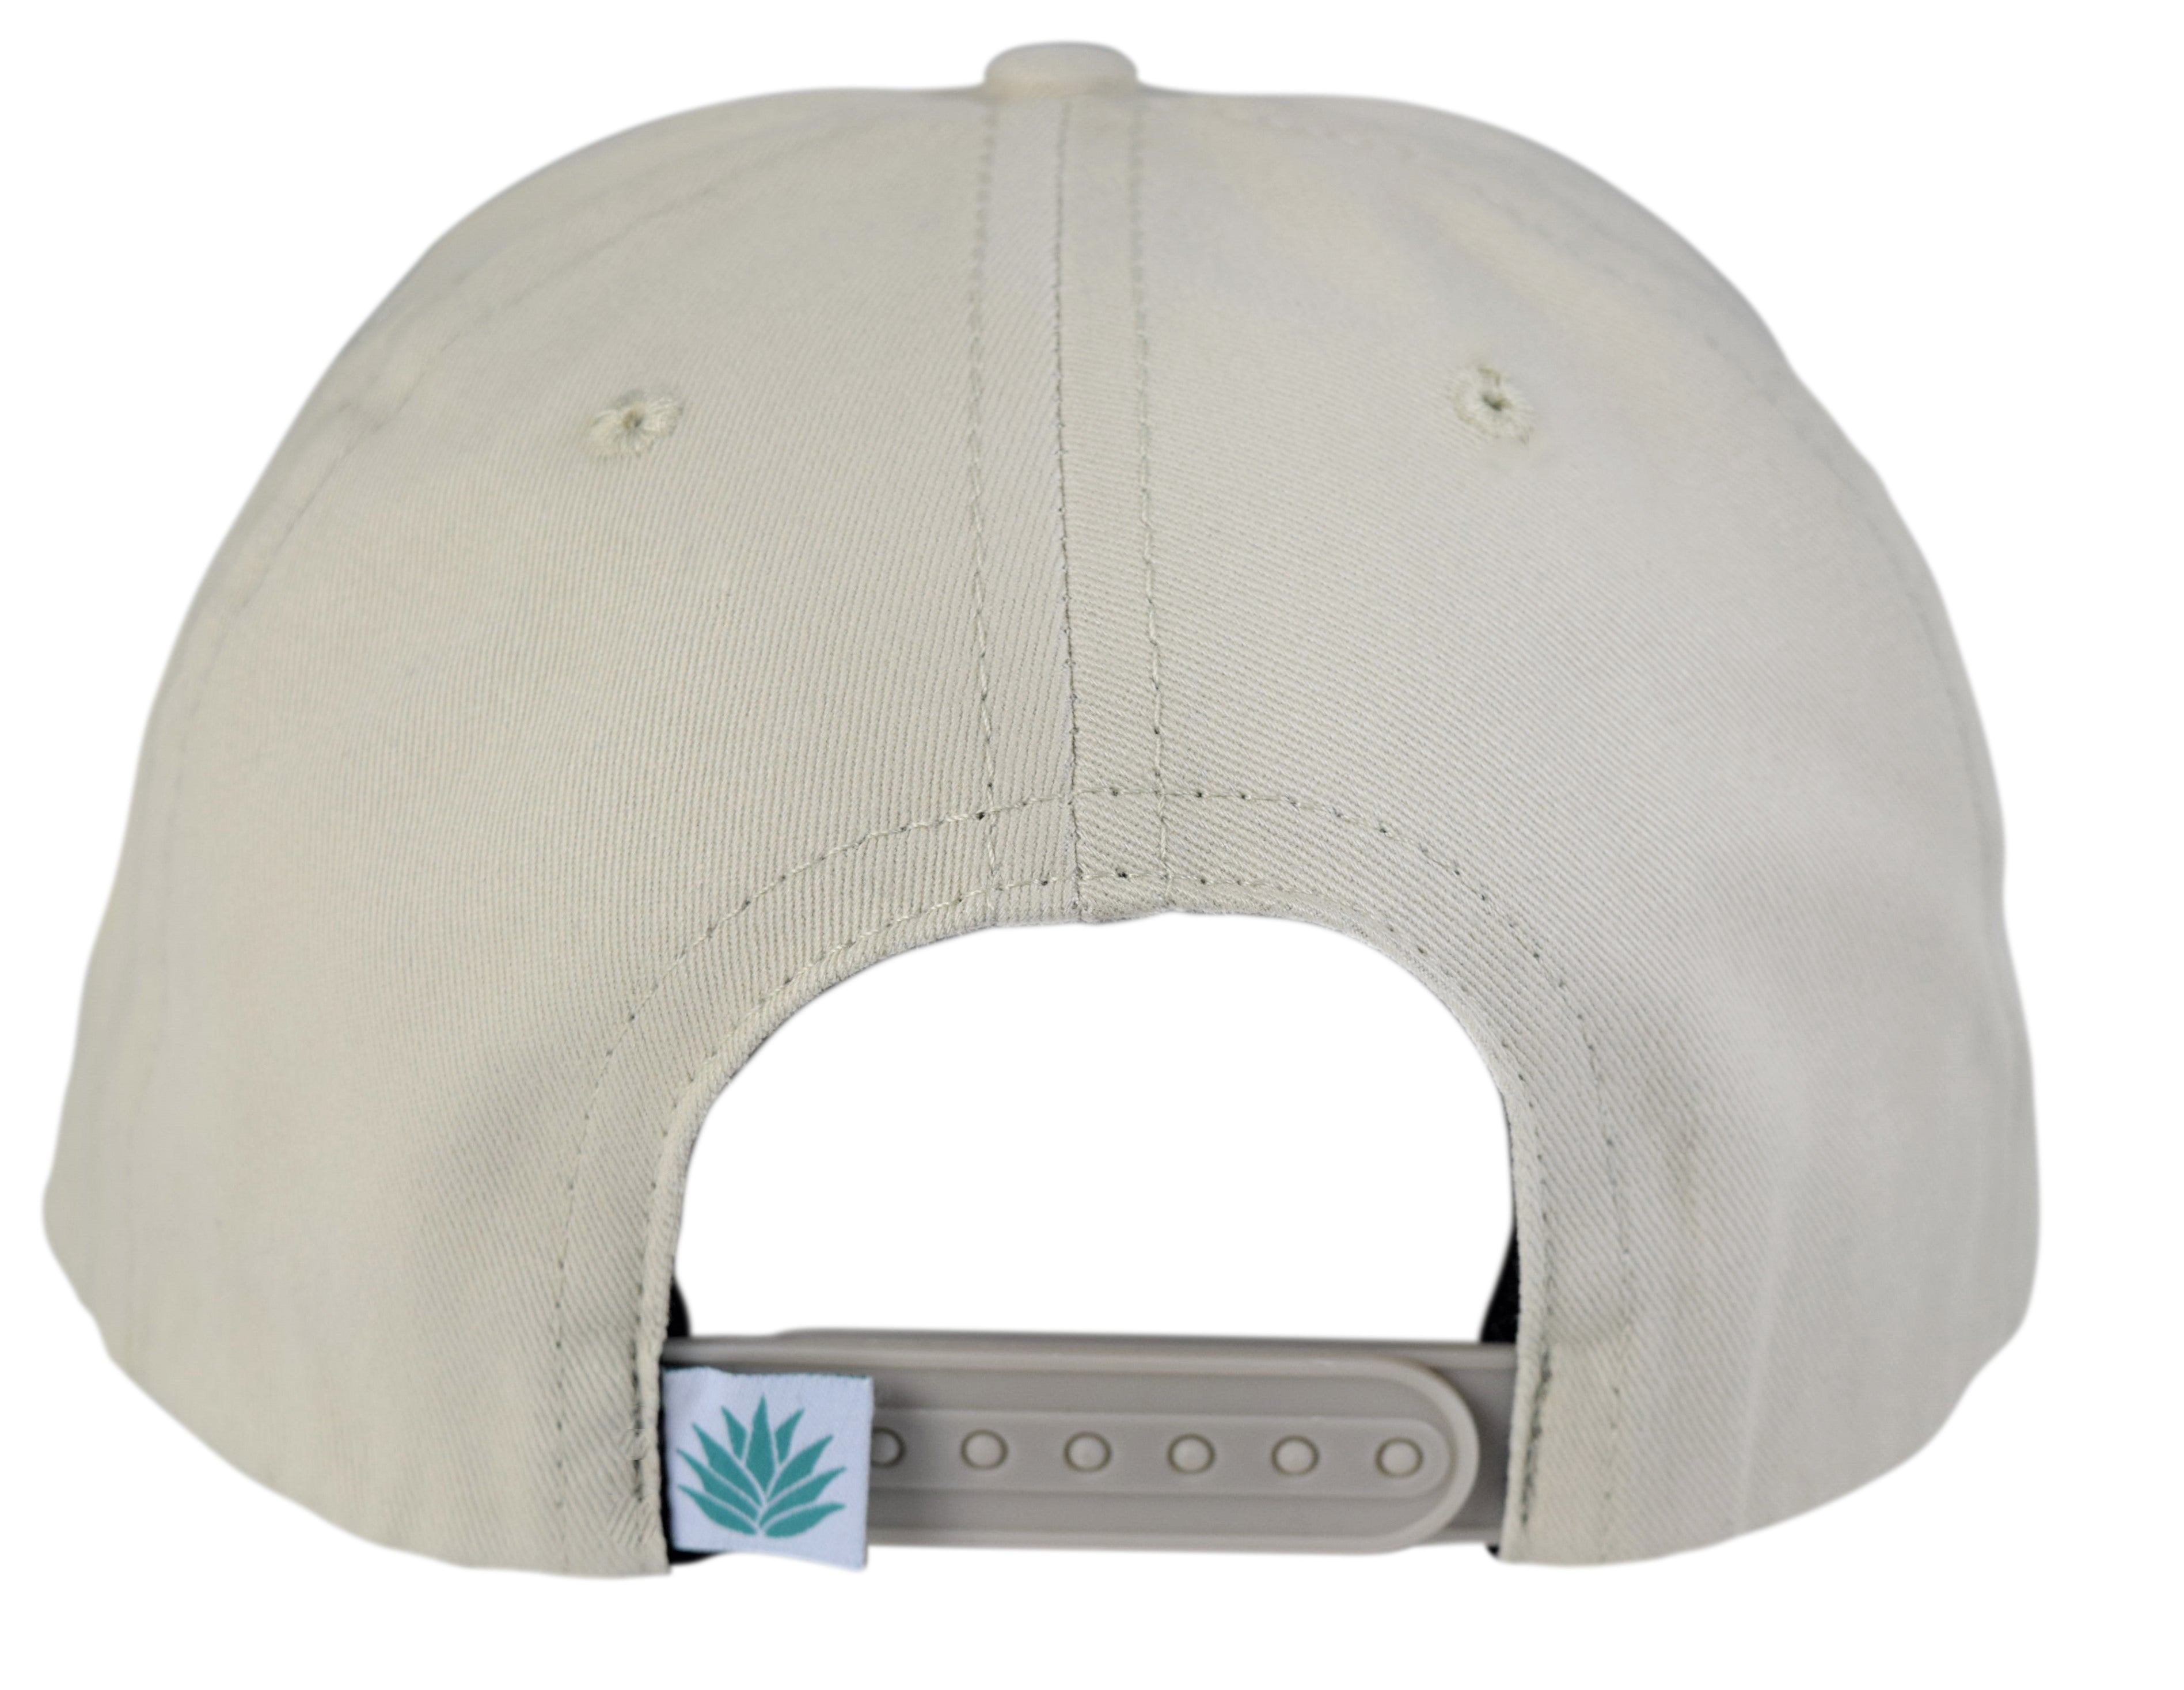 Sendero Provisions Co. Arches National Park Snapback Cap (Off White/Teal)